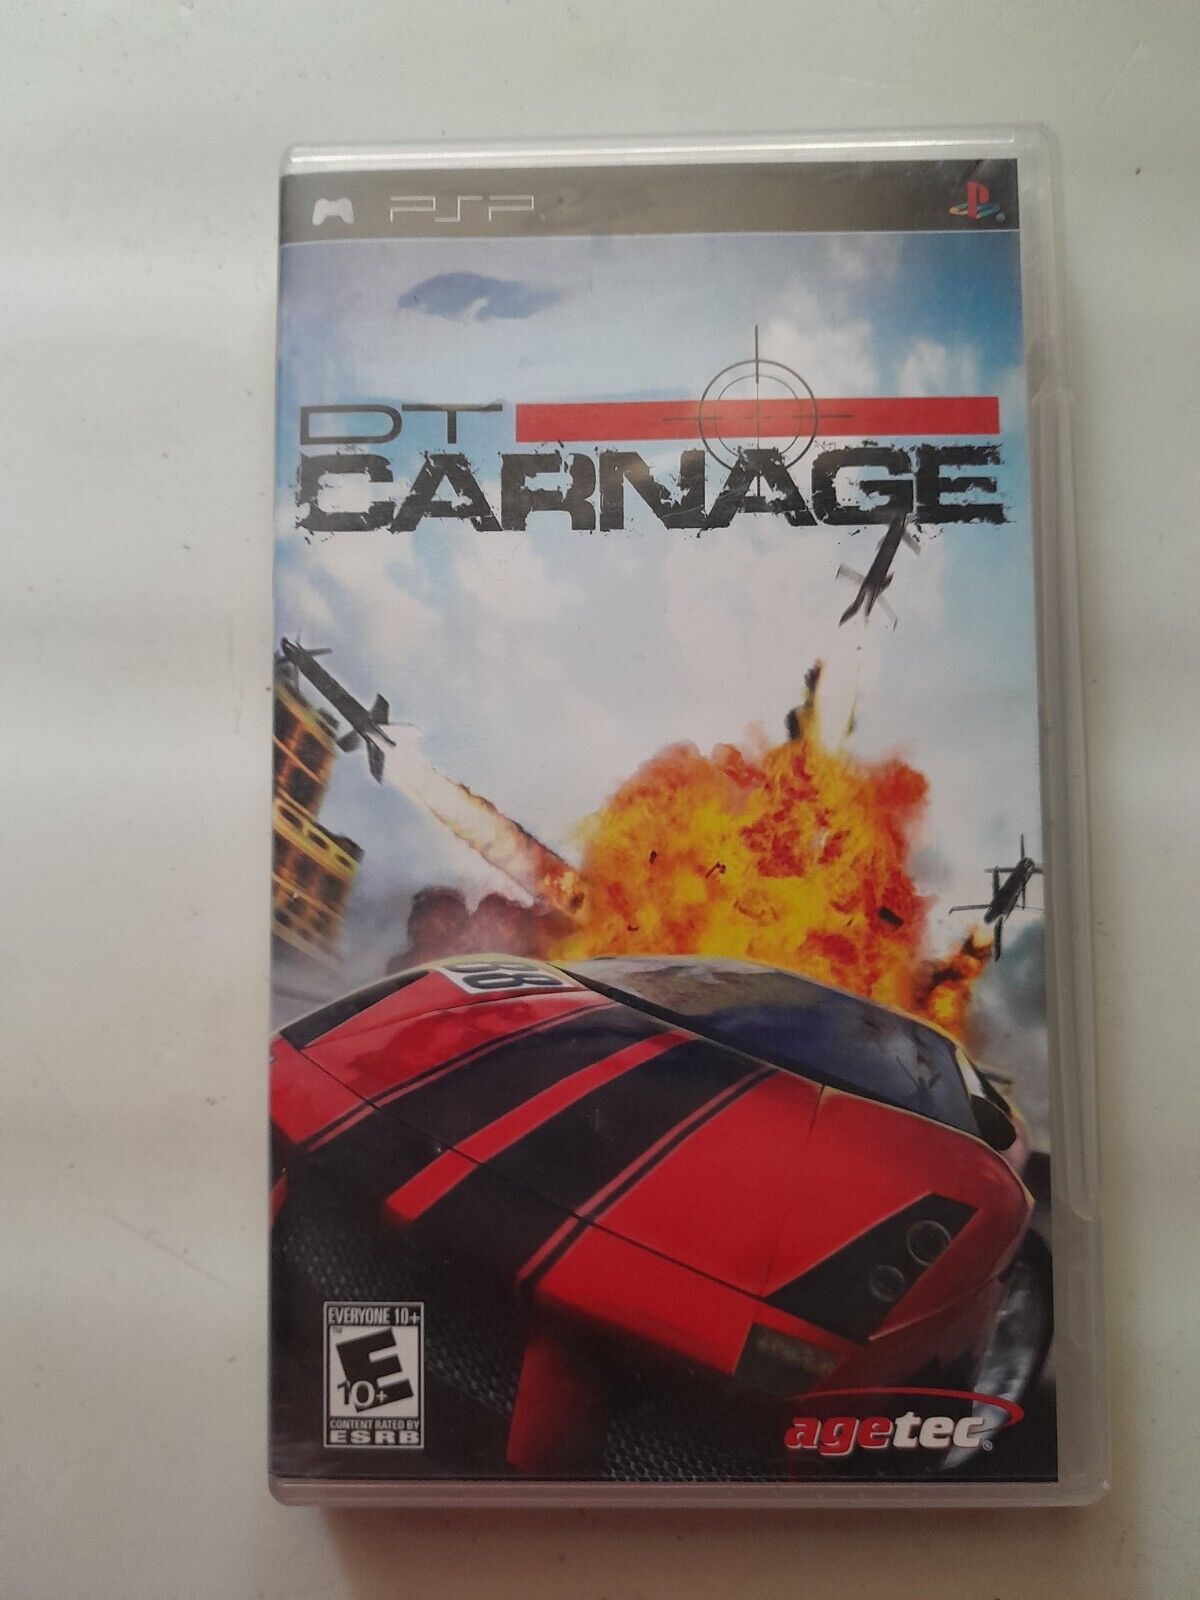 Sony PSP DT Carnage with Manual